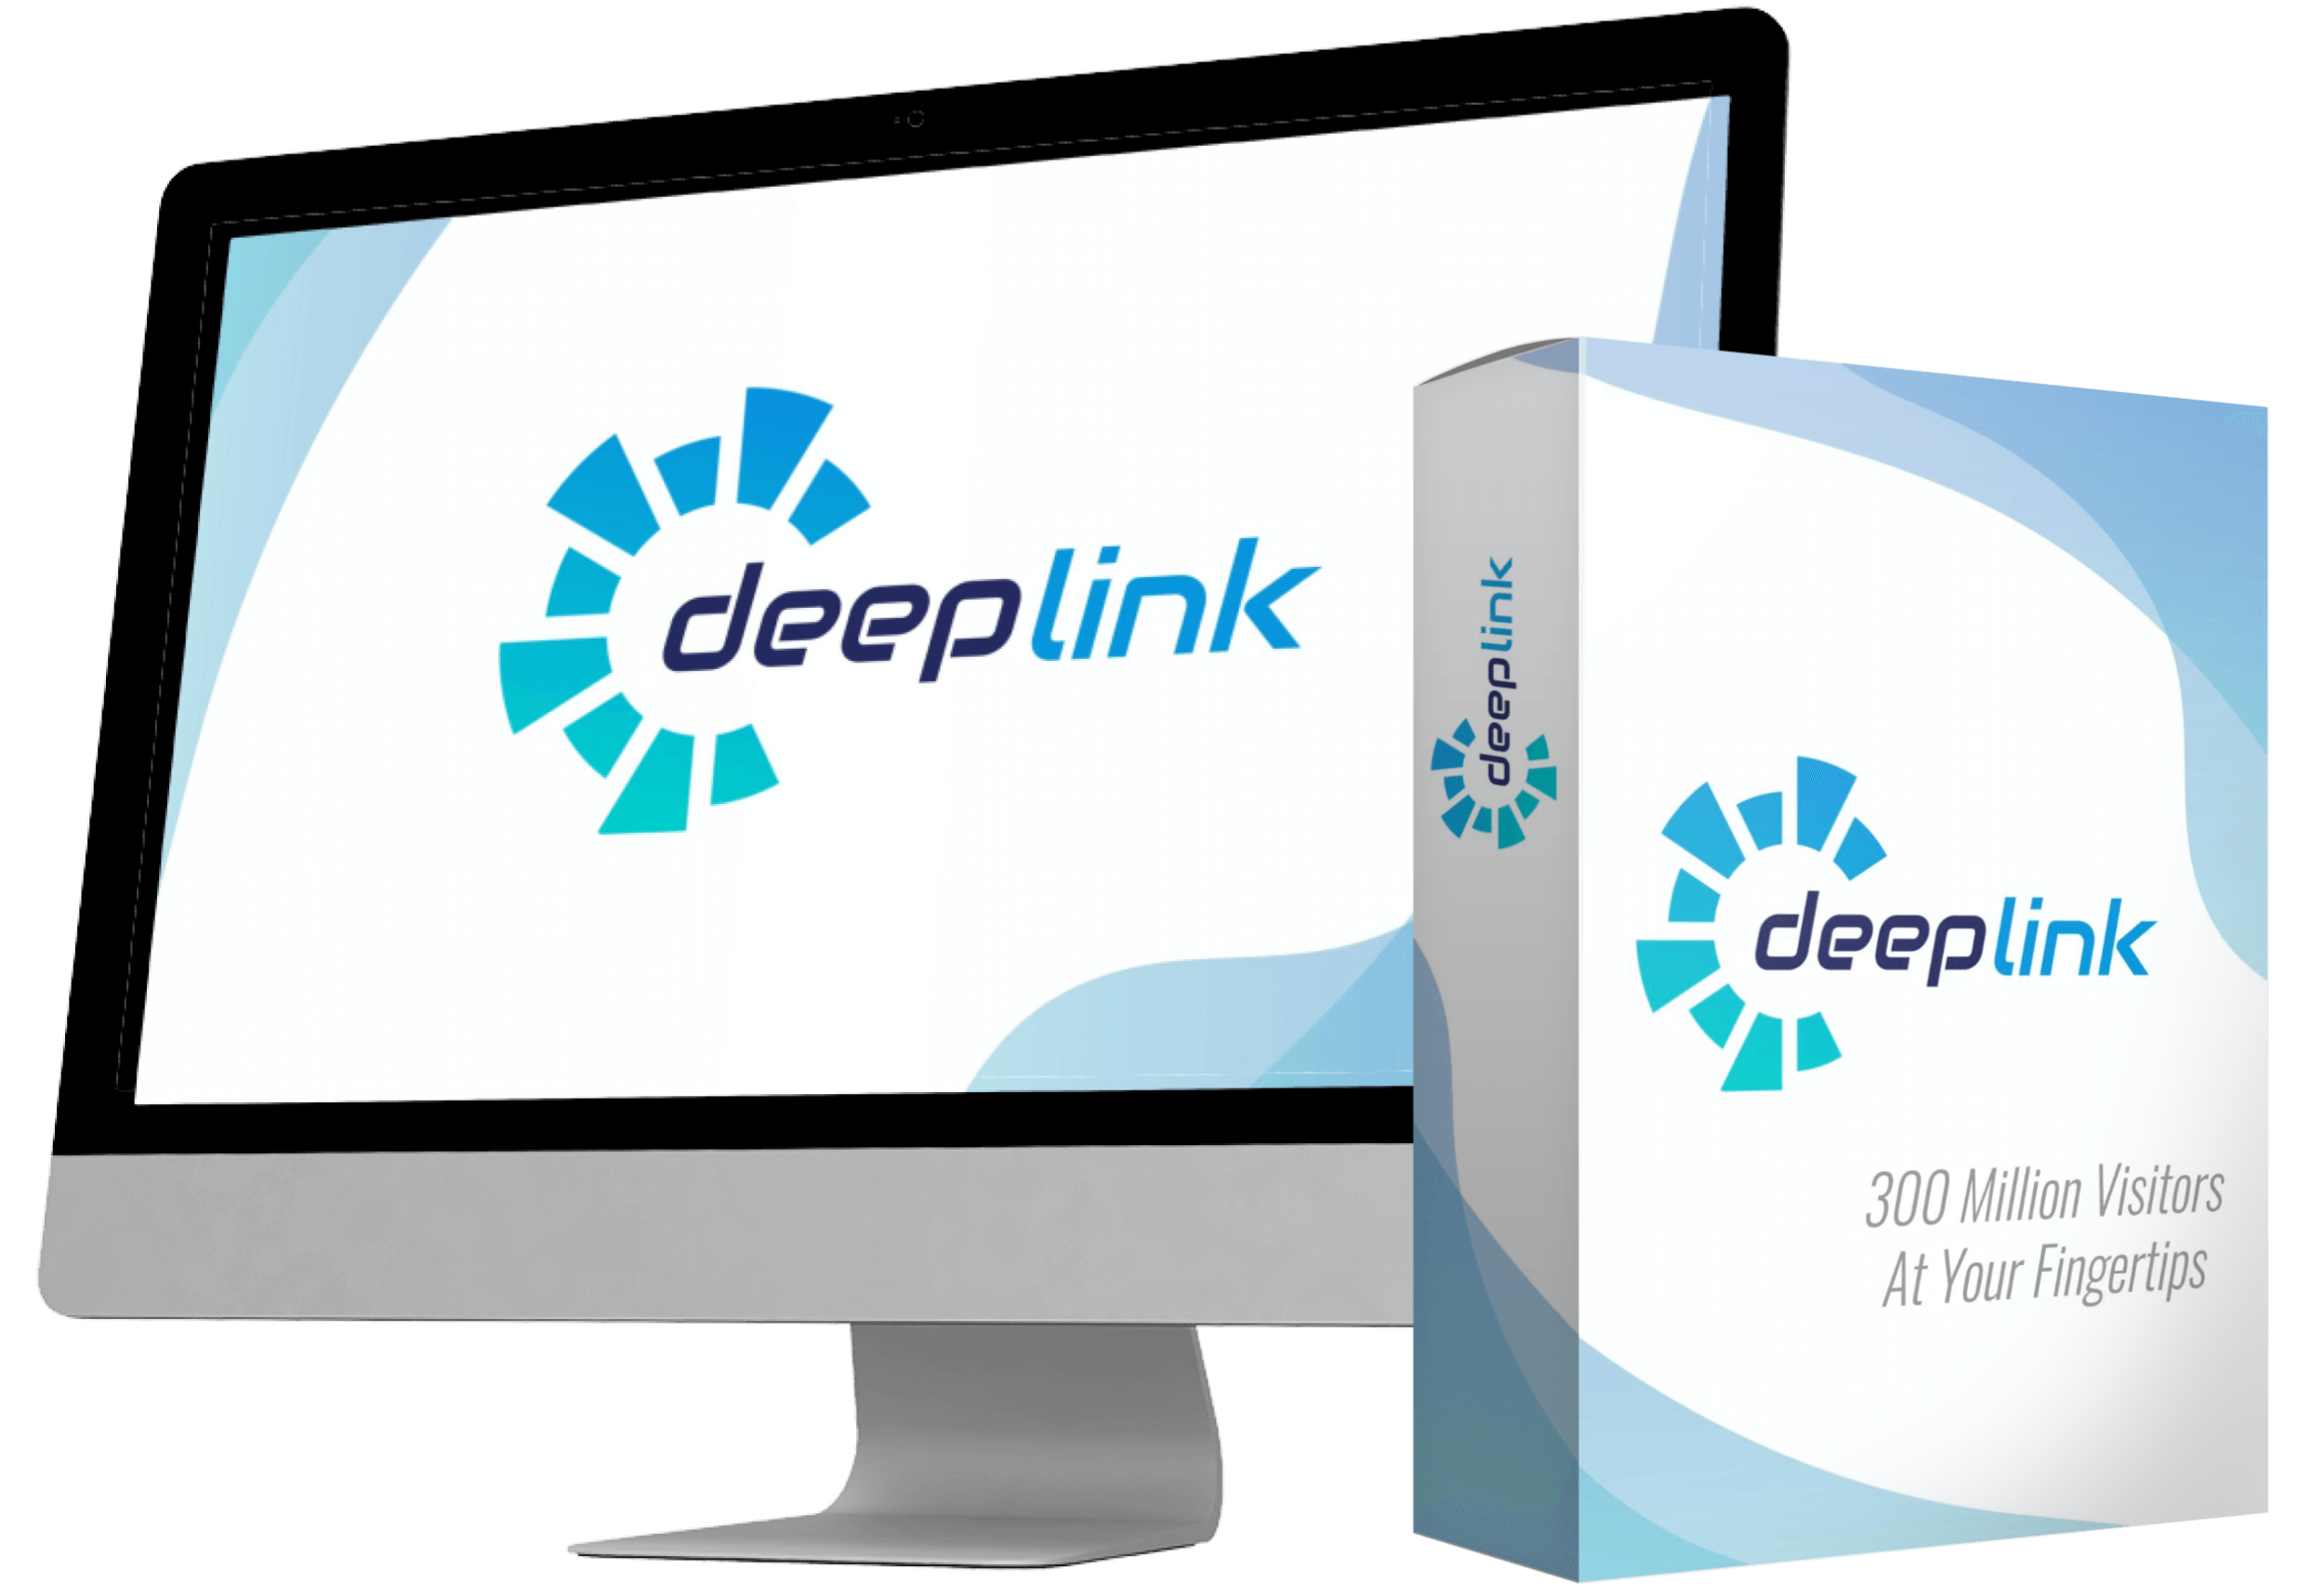 [GET] Branson Tay – DeepLink (Put ANY Link In Front Of Up To 300 Million Buyers) Free Download